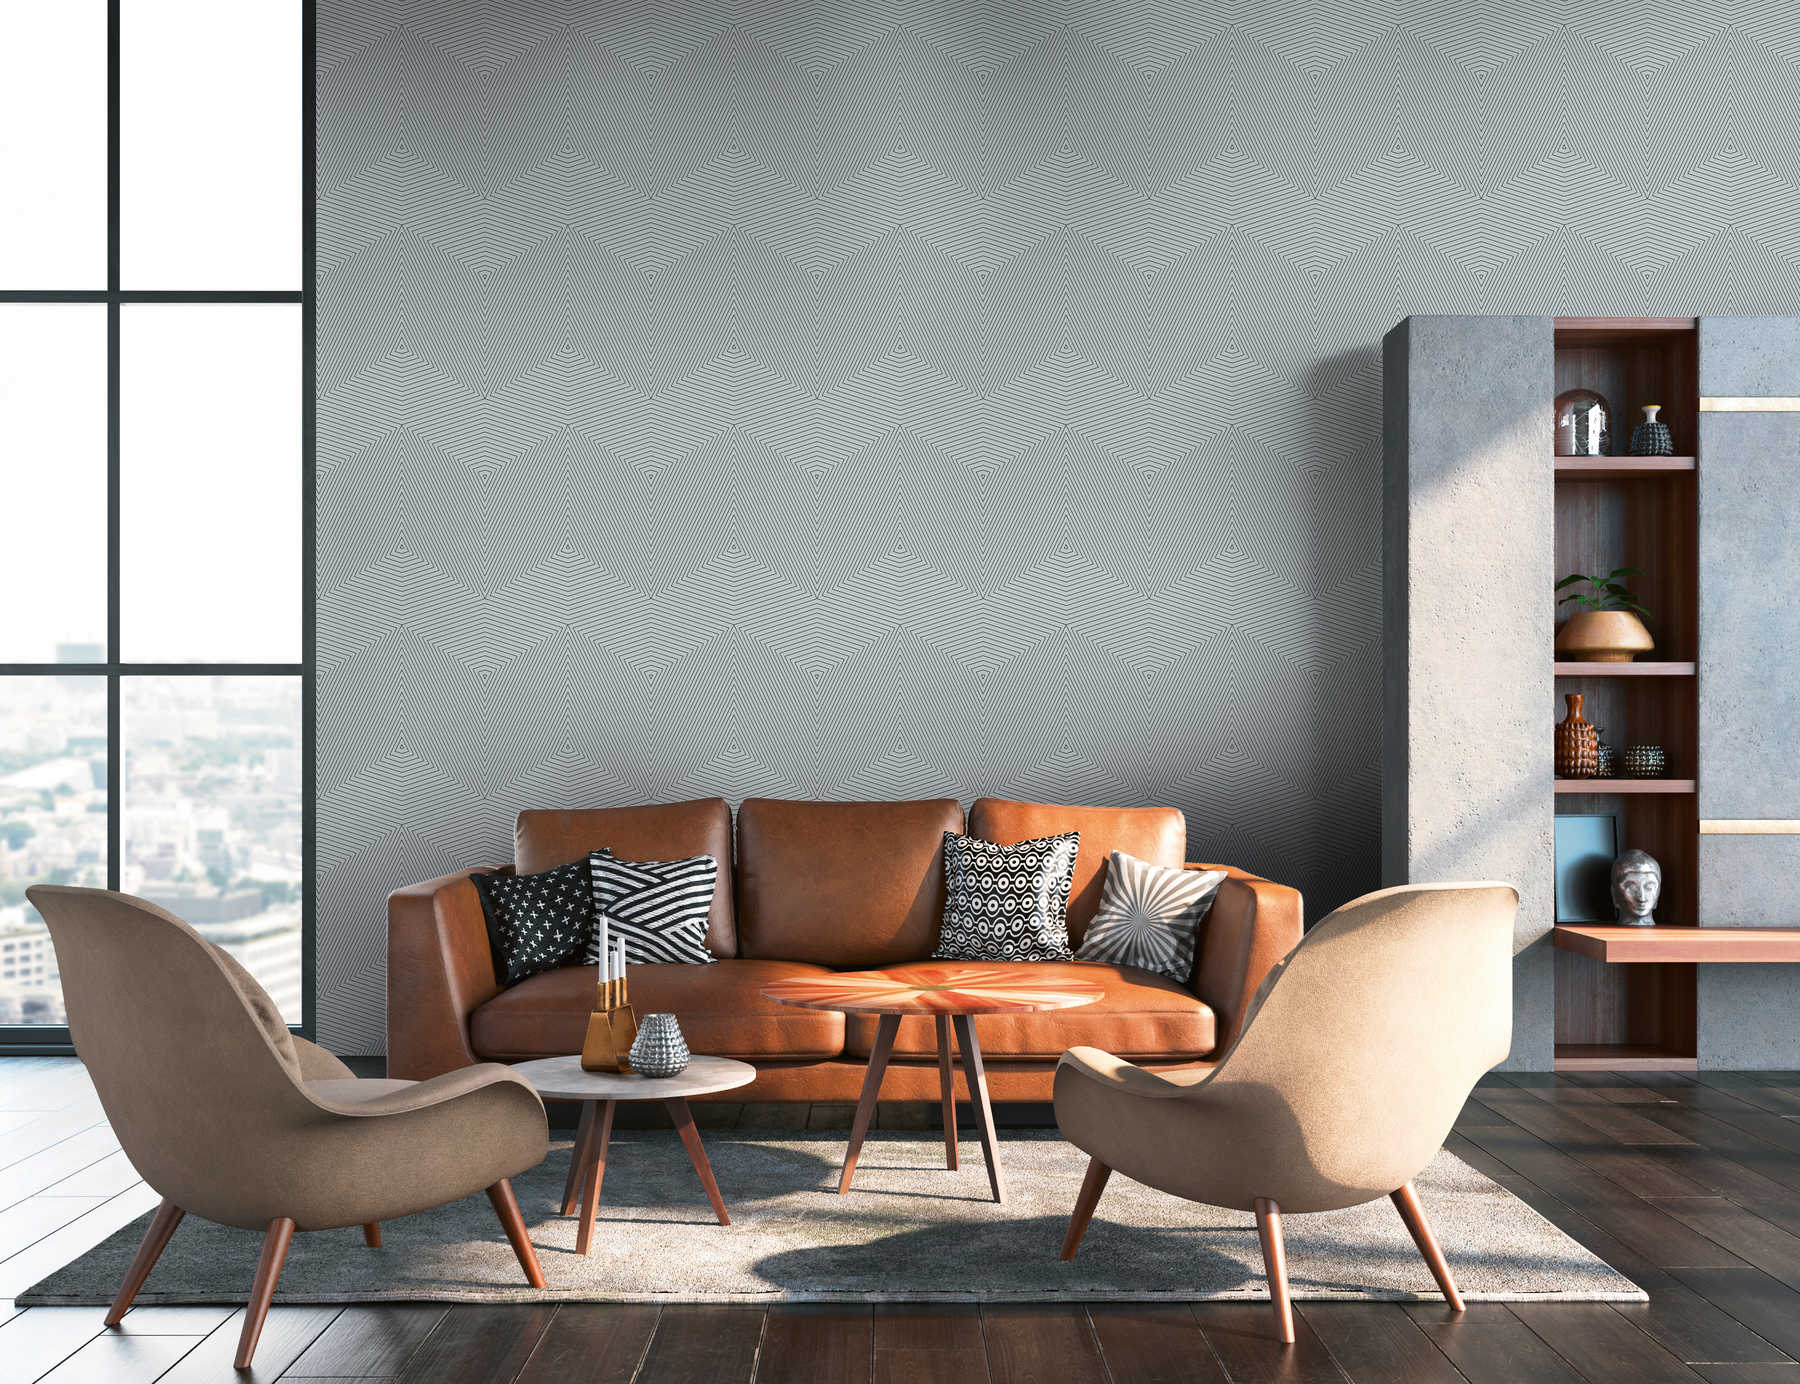             Non-woven wallpaper with lines pattern & metallic effect - blue, grey
        